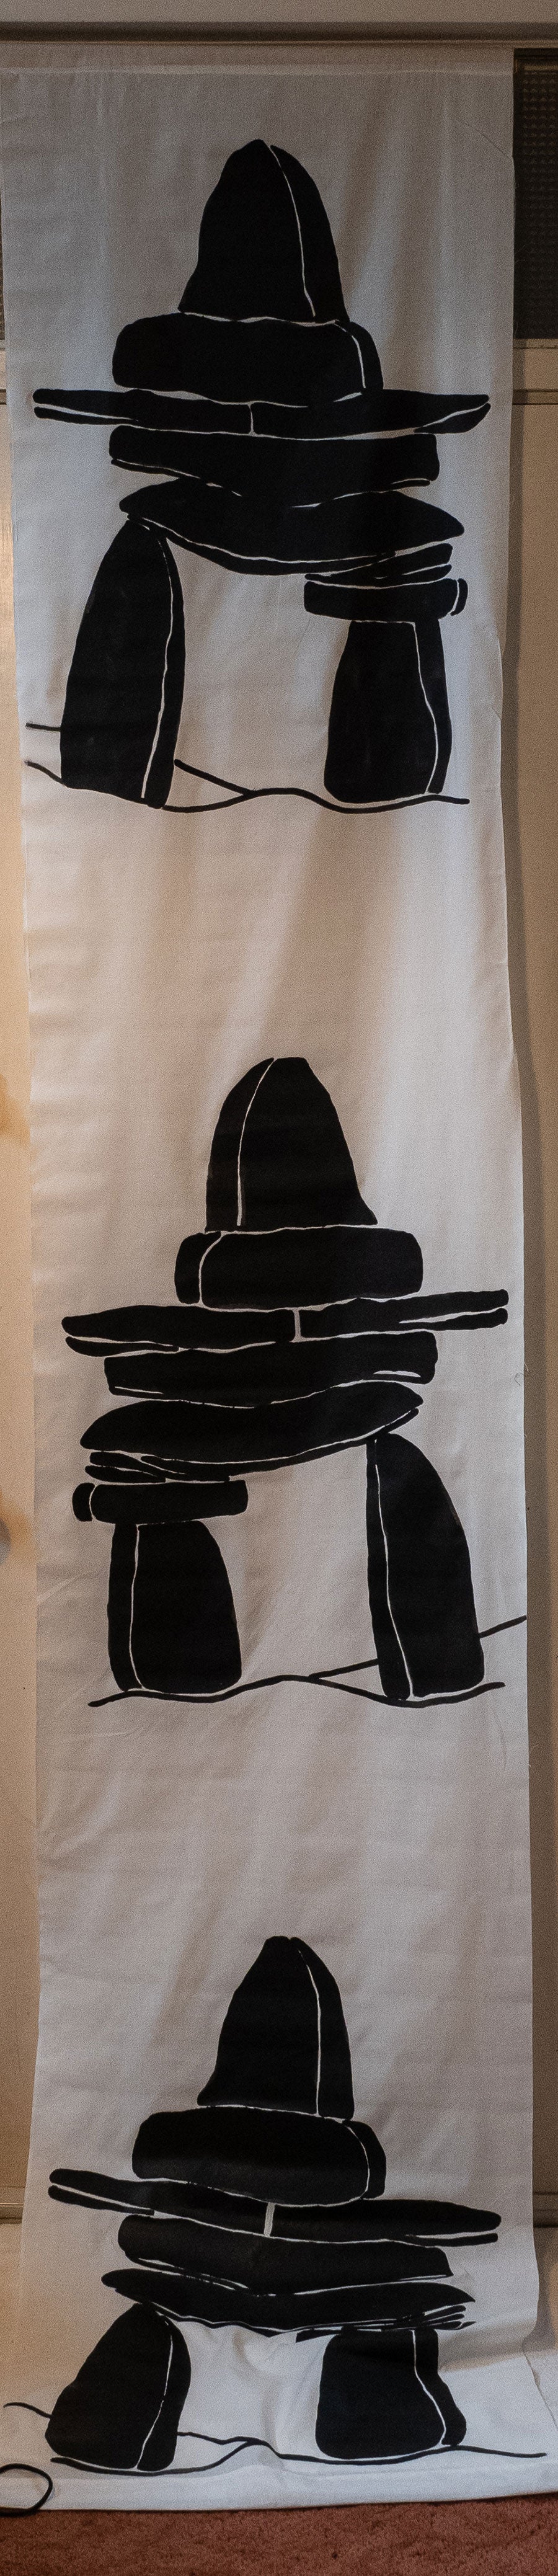 Inukshuks in black and white on a tall banner.